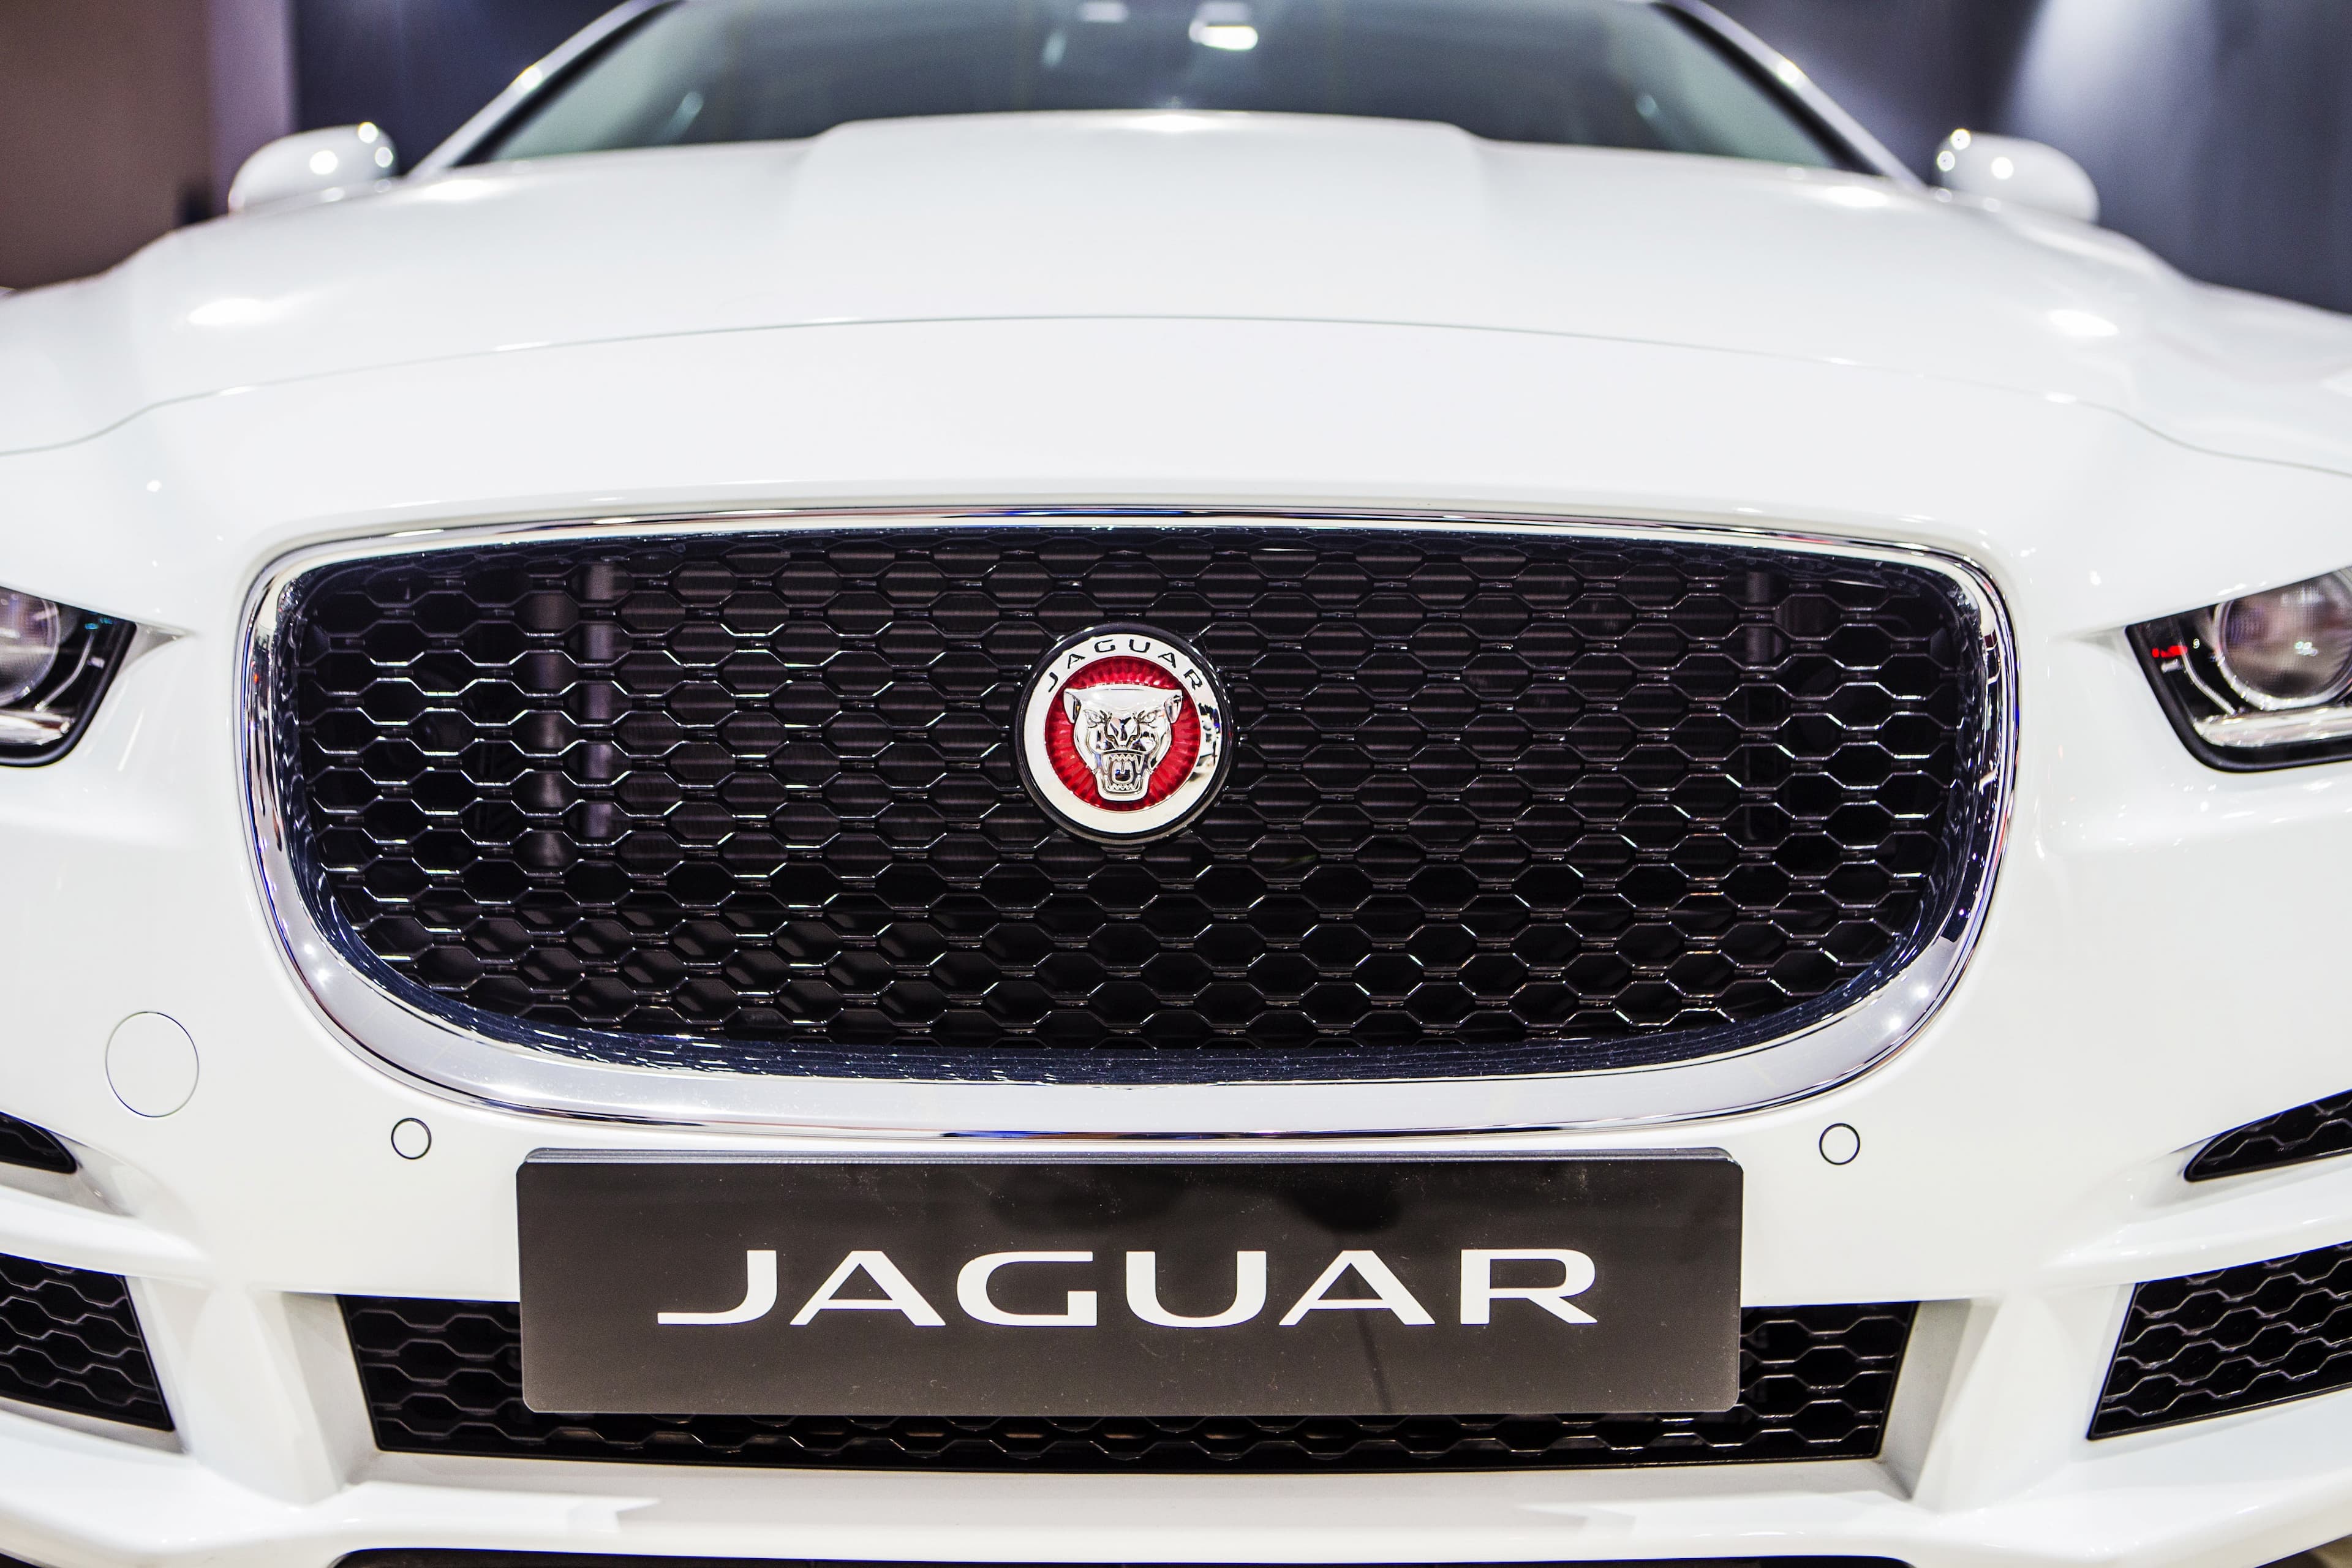 Jaguar Ad Dinged by Watchdog Group for Encouraging Distracted Driving